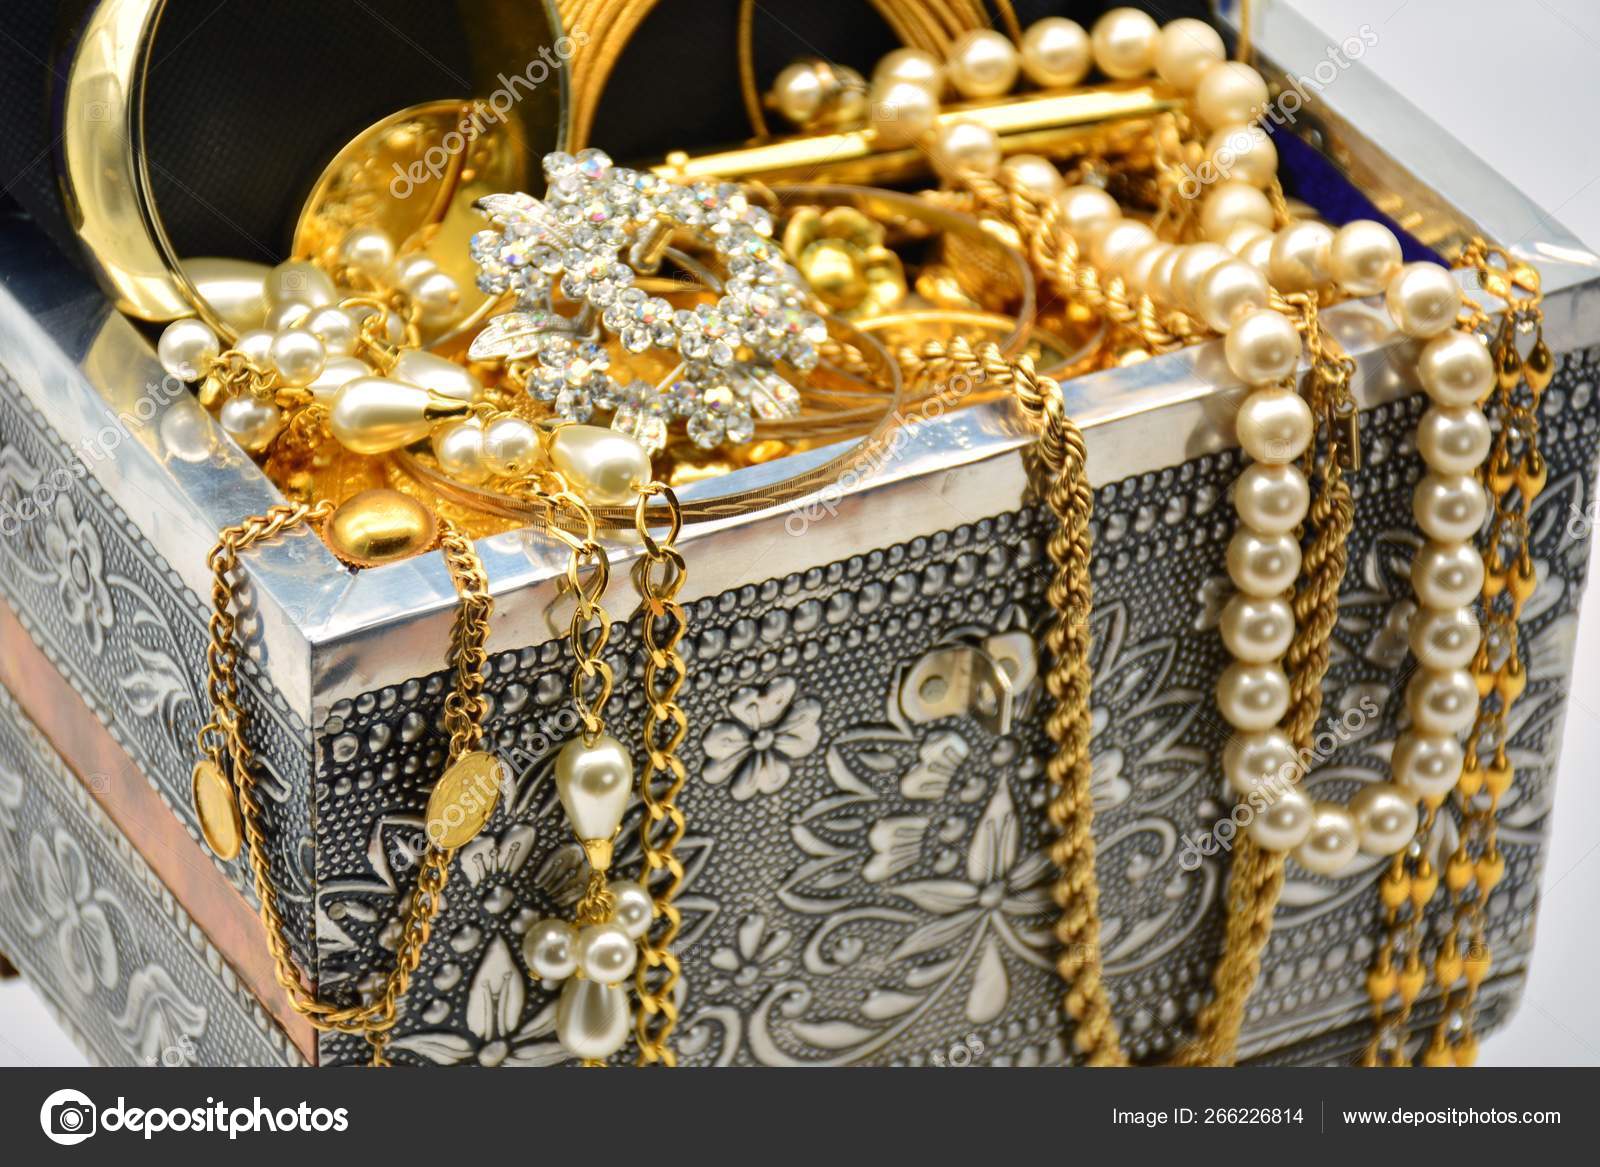 Treasure Chest Full Jewels Jewelry Pearls Gold Stock Photo by